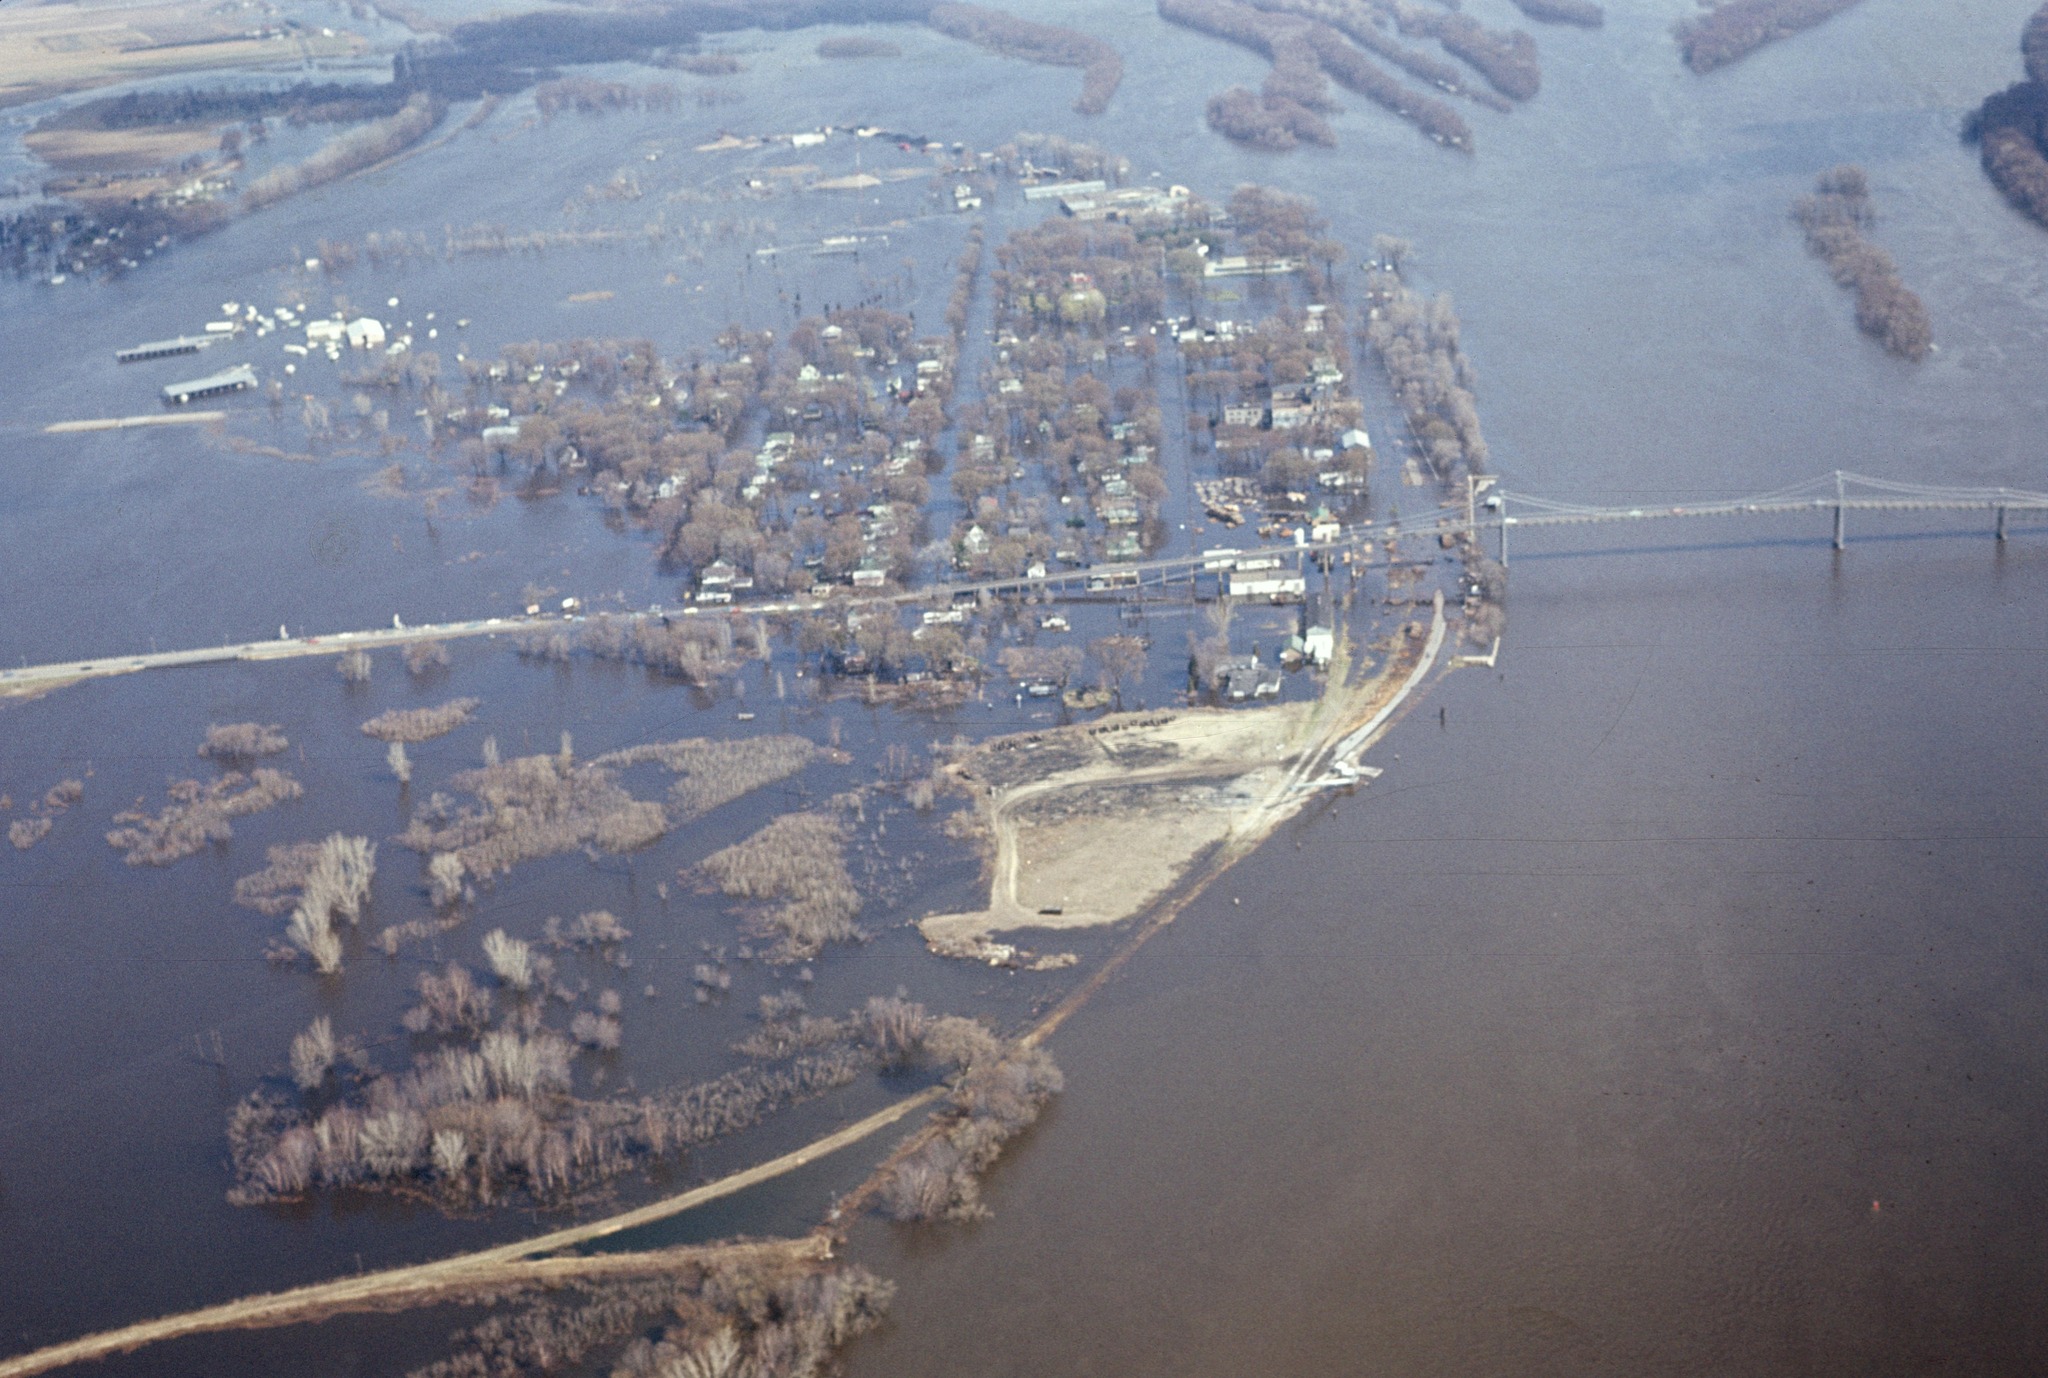 The city's location does put it at risk for flooding. Here's a massive flood of the Mississippi in Prairie du Chien, 1965.